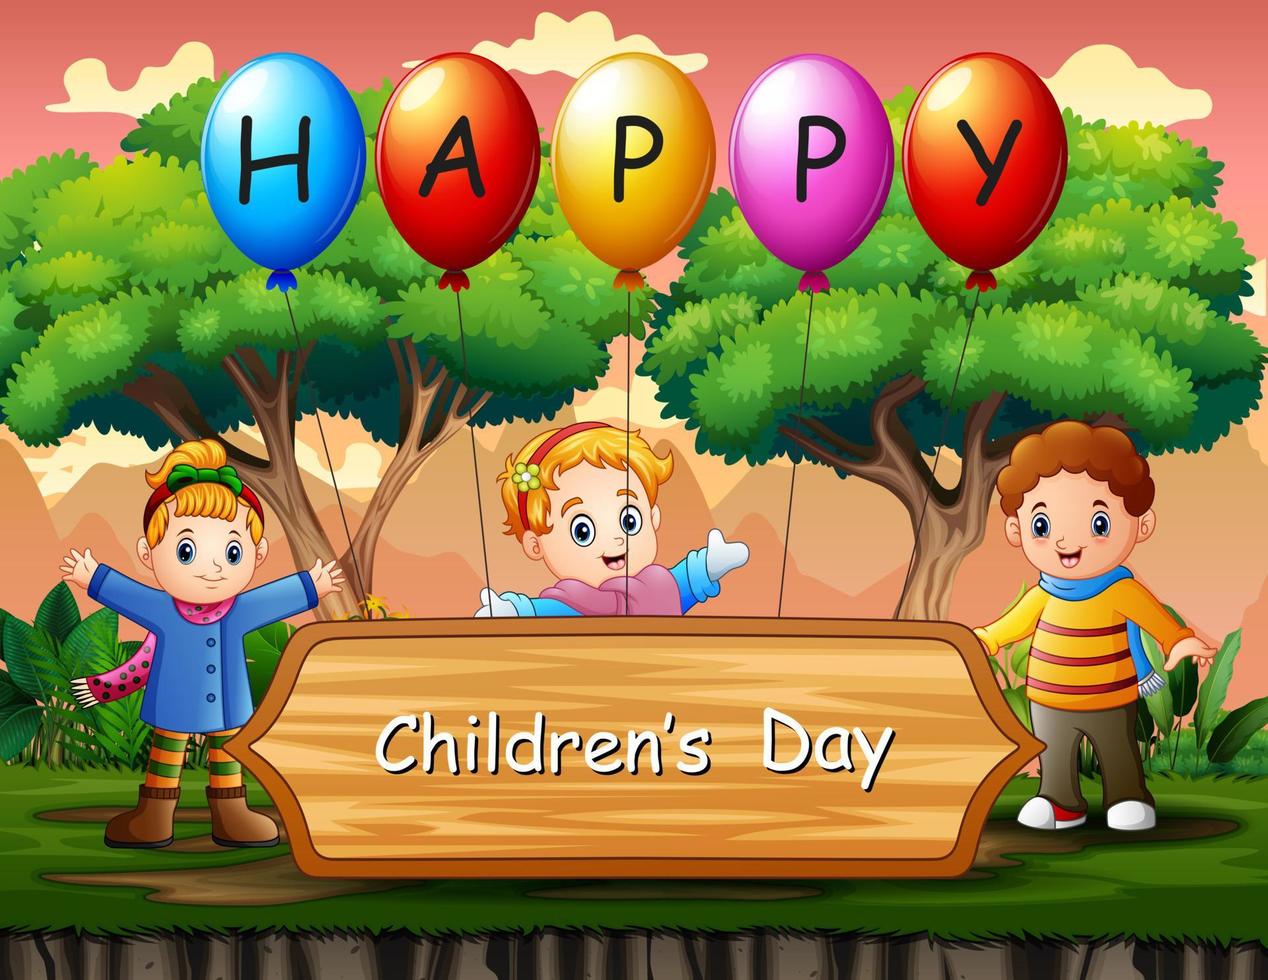 Happy children's day poster with kids in the park illustration vector